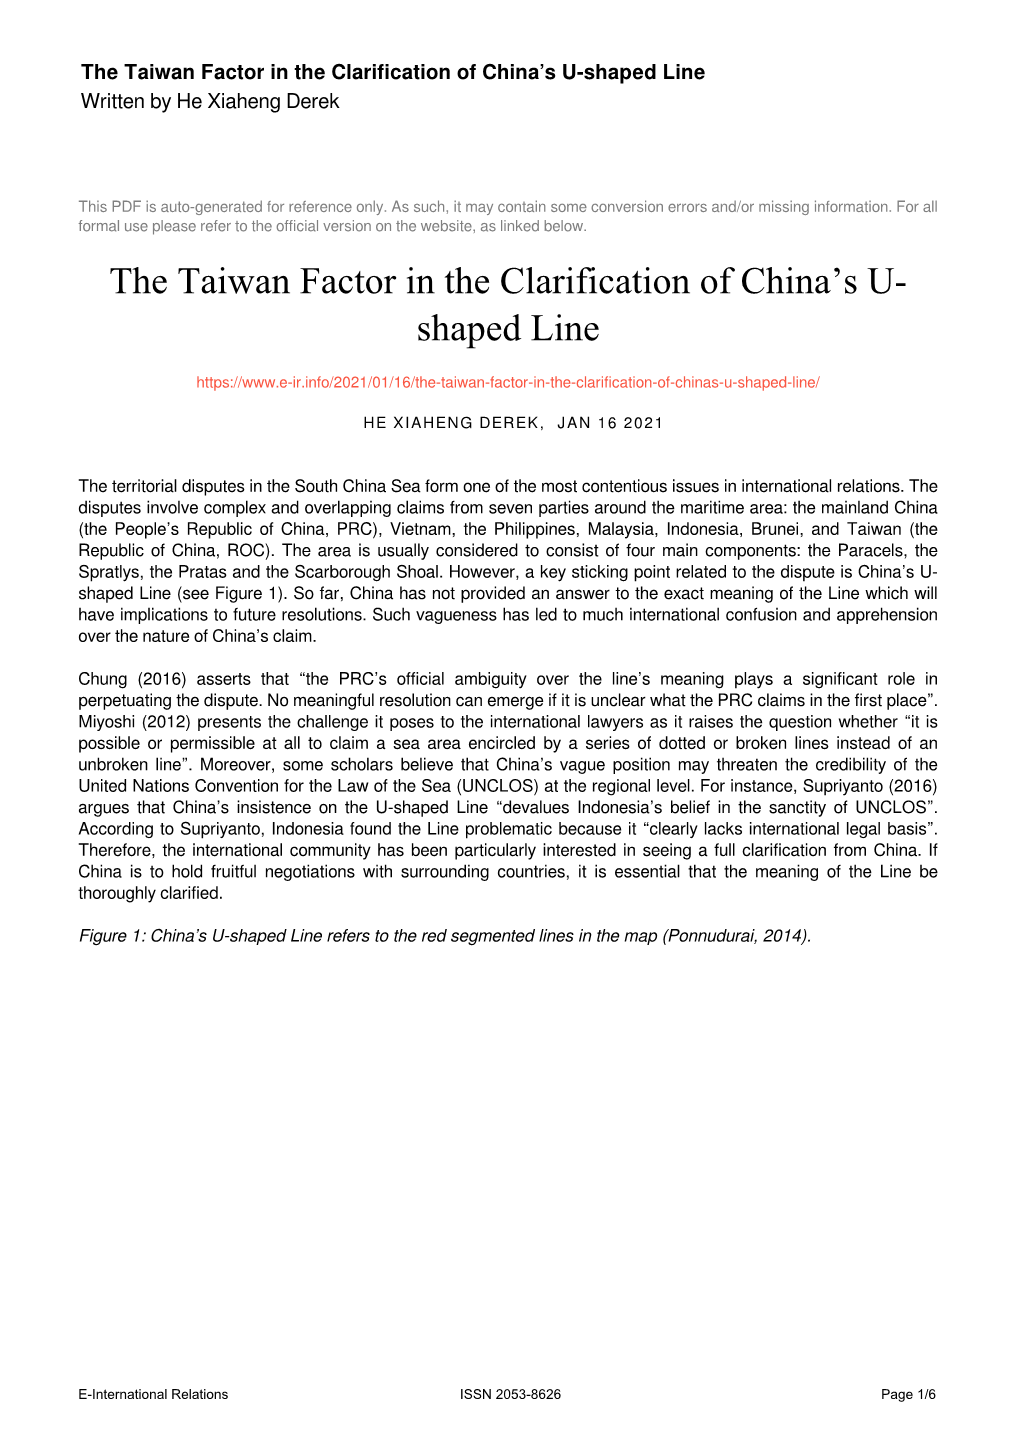 The Taiwan Factor in the Clarification of China's U-Shaped Line